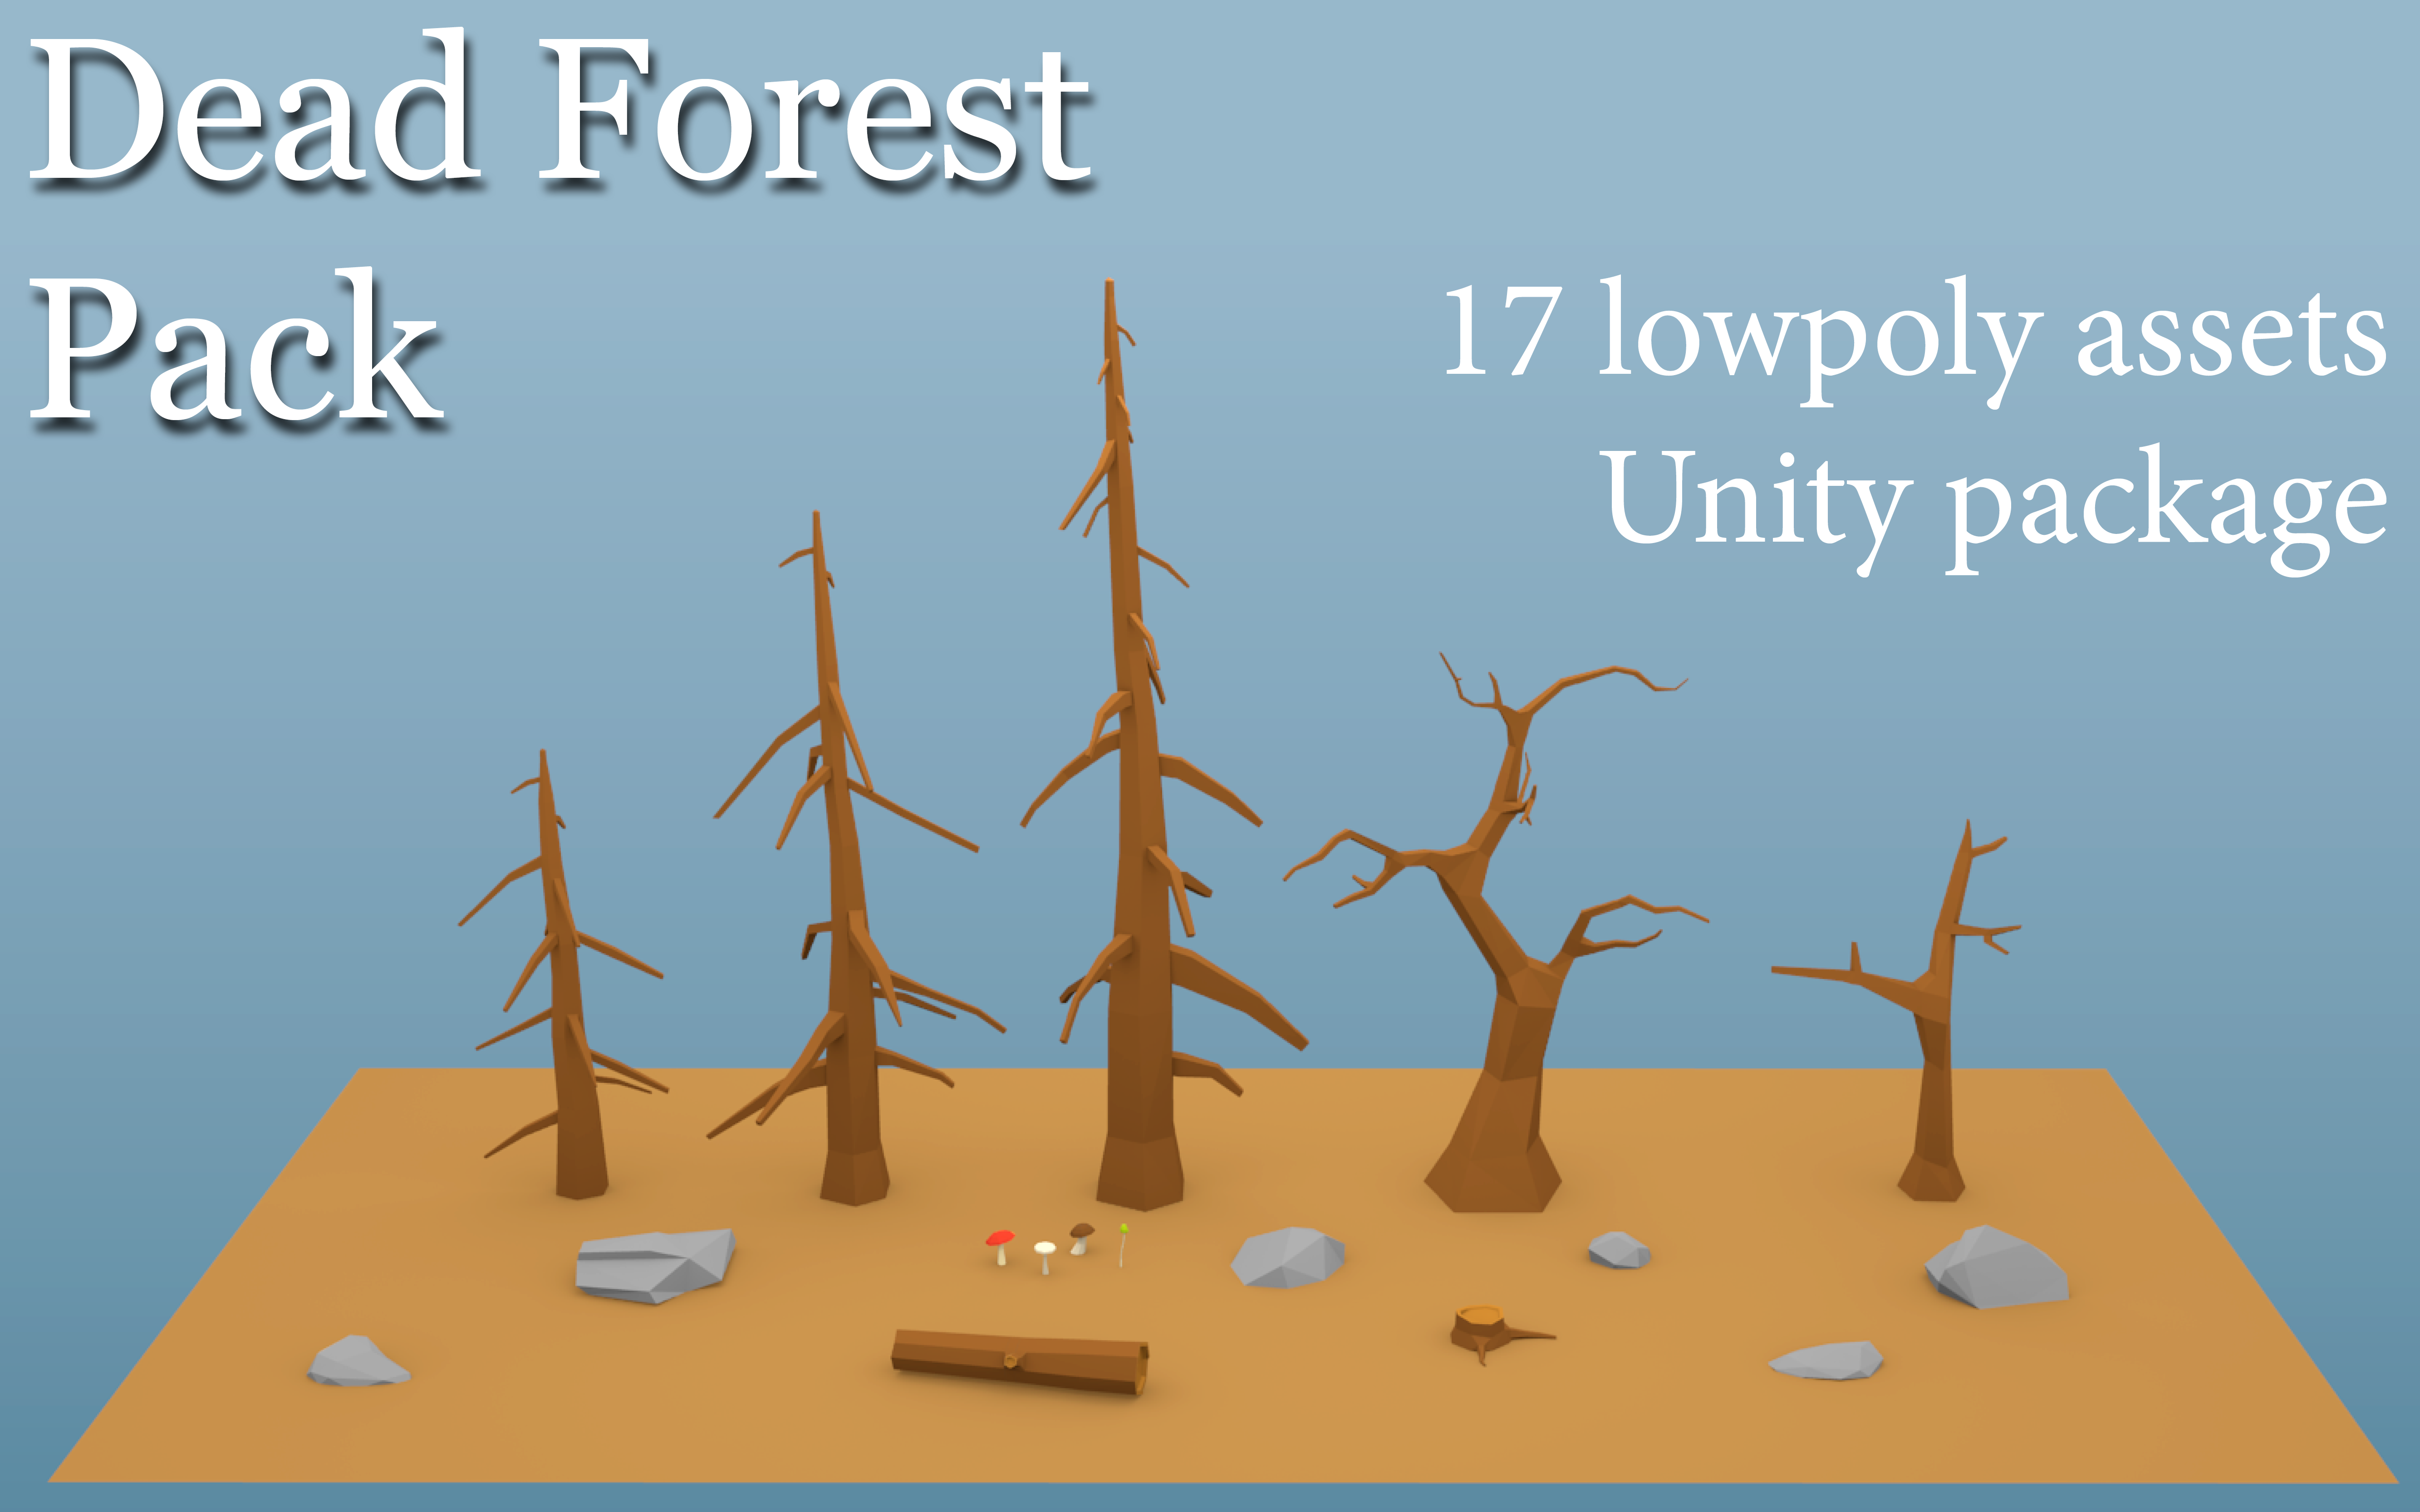 Dead Forest Pack - Lowpoly